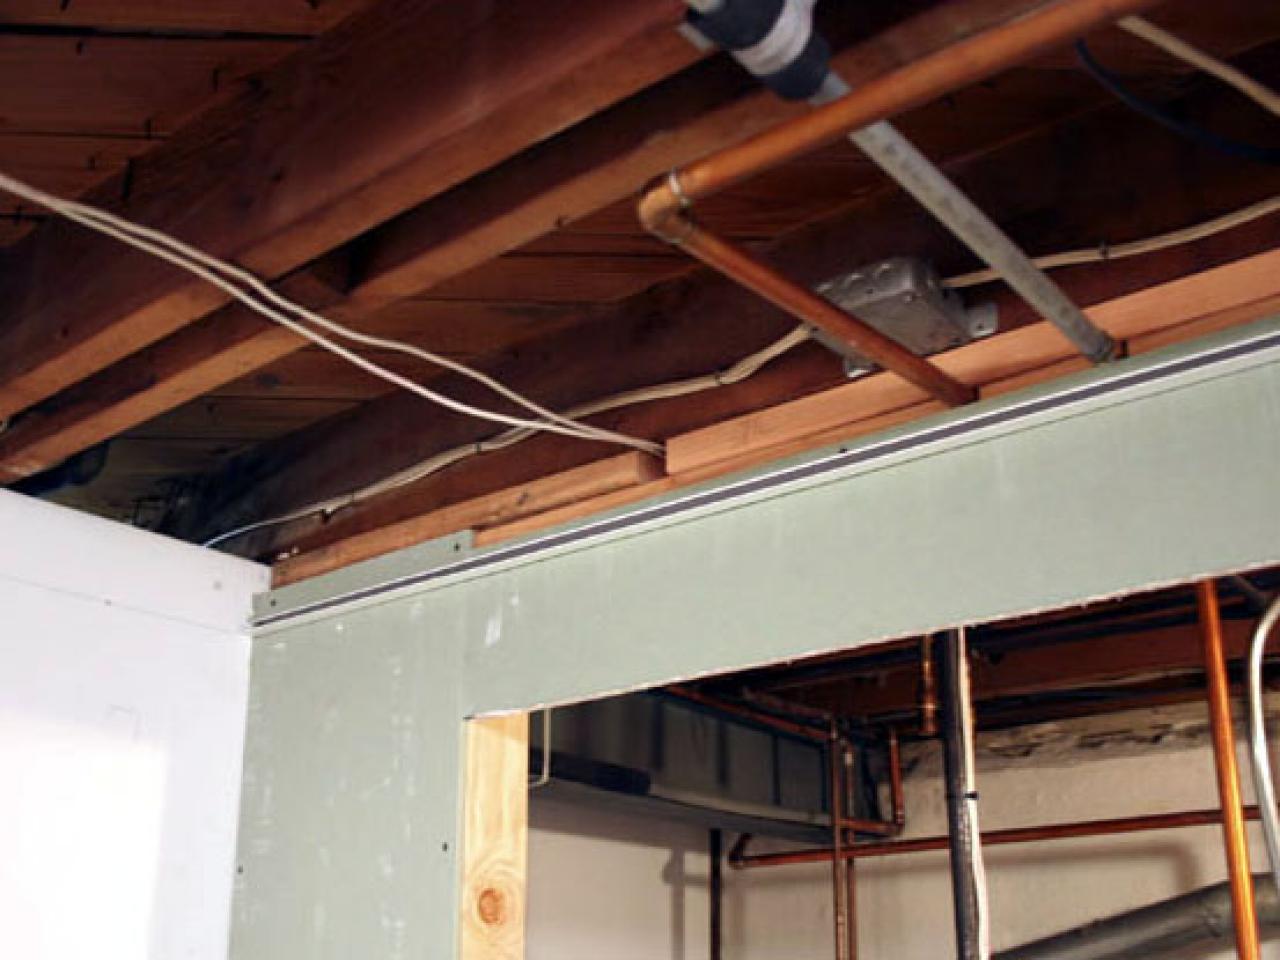 Installing A Drop Ceiling In Basement Laundry - How To Put A Ceiling In Basement